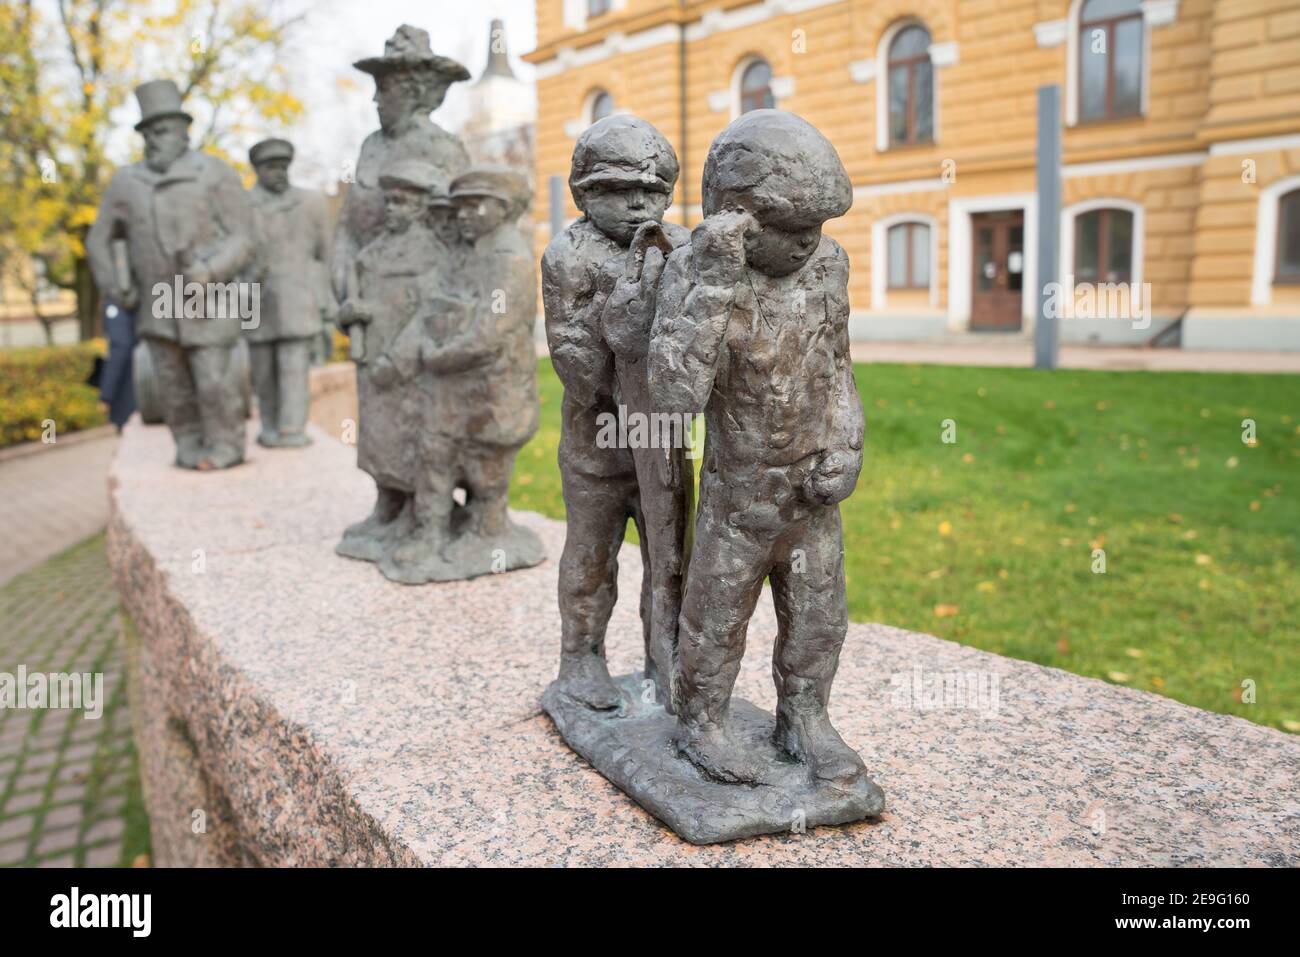 OULU, FINLAND - October 12, 2020: Close up of “Passage of Time” bronze sculpture by Sanna Koivisto in Maria Silfvan Park. Two traditional finish boys Stock Photo